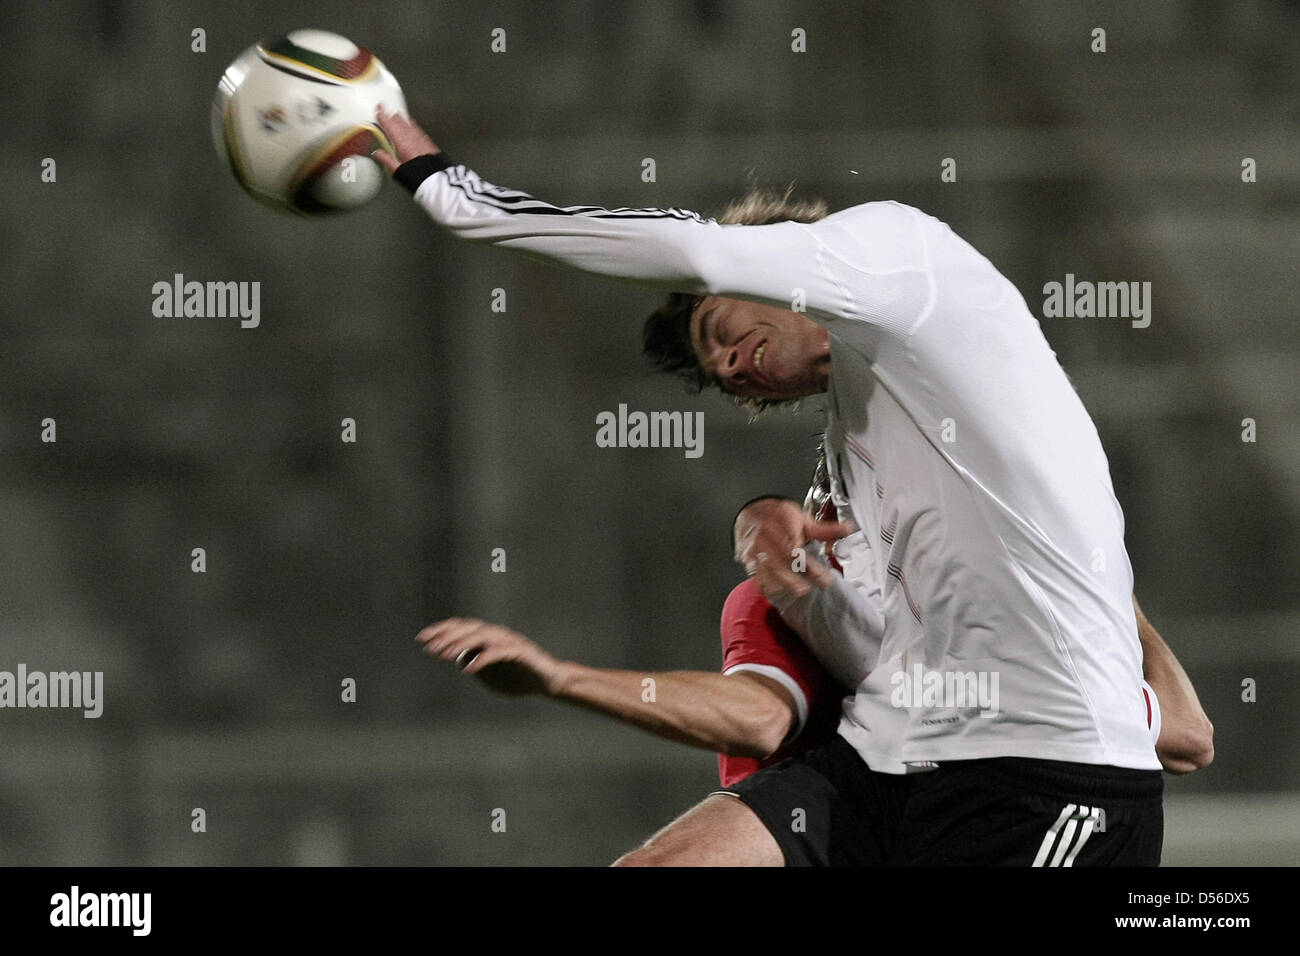 Germany's Stefan Bell (front) and England's Jack Cork (covered) vie for the ball during the U-21 international match Germany vs. England at the Brita-Arena in Wiesbaden, Germany, 16 November 2010. Photo: Fredrik von Erichsen Stock Photo